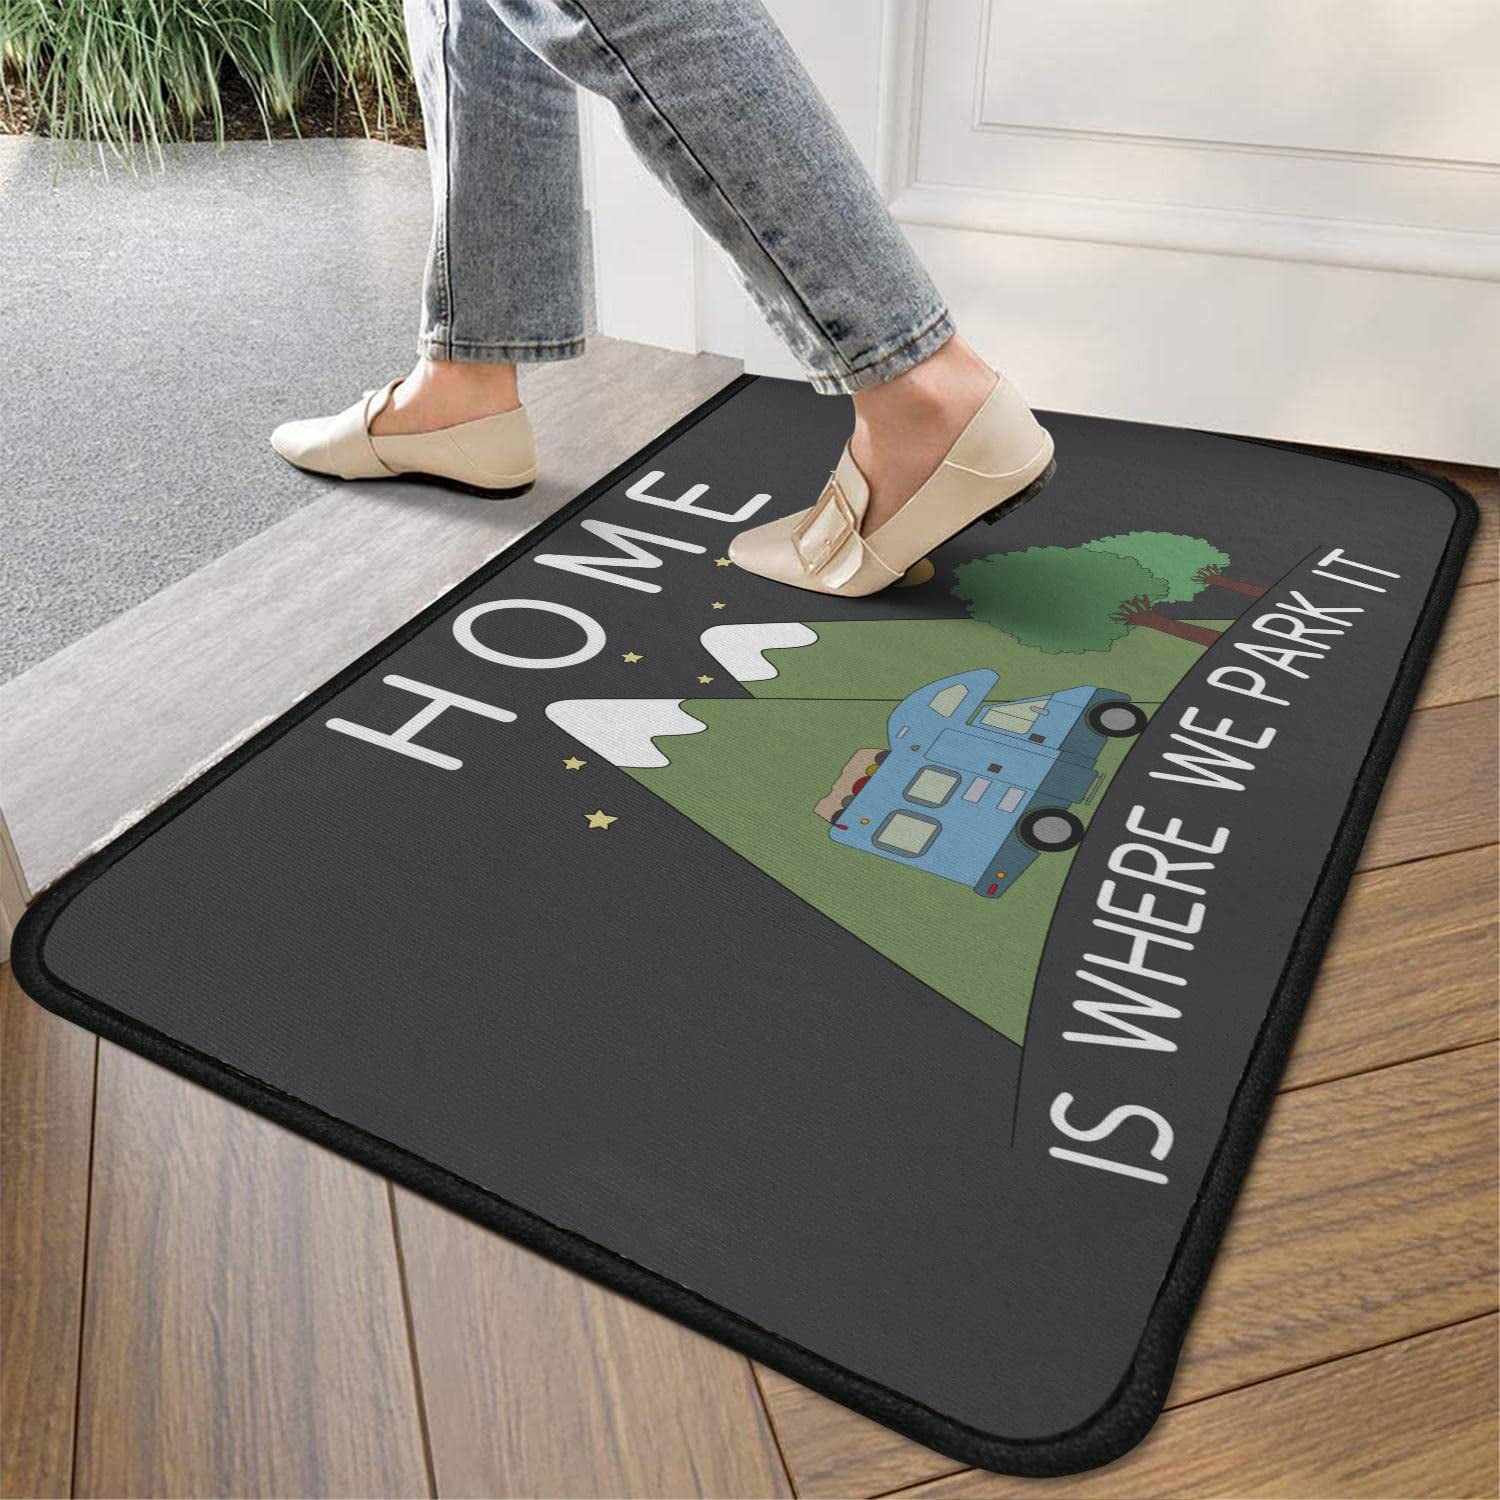 Camping, Camper, RV Doormat, Camping Life Door Mat, Camper Hiker Tent Gift,  Happy Campers Welcome Mat, Gift for Camping, Vacation Home 